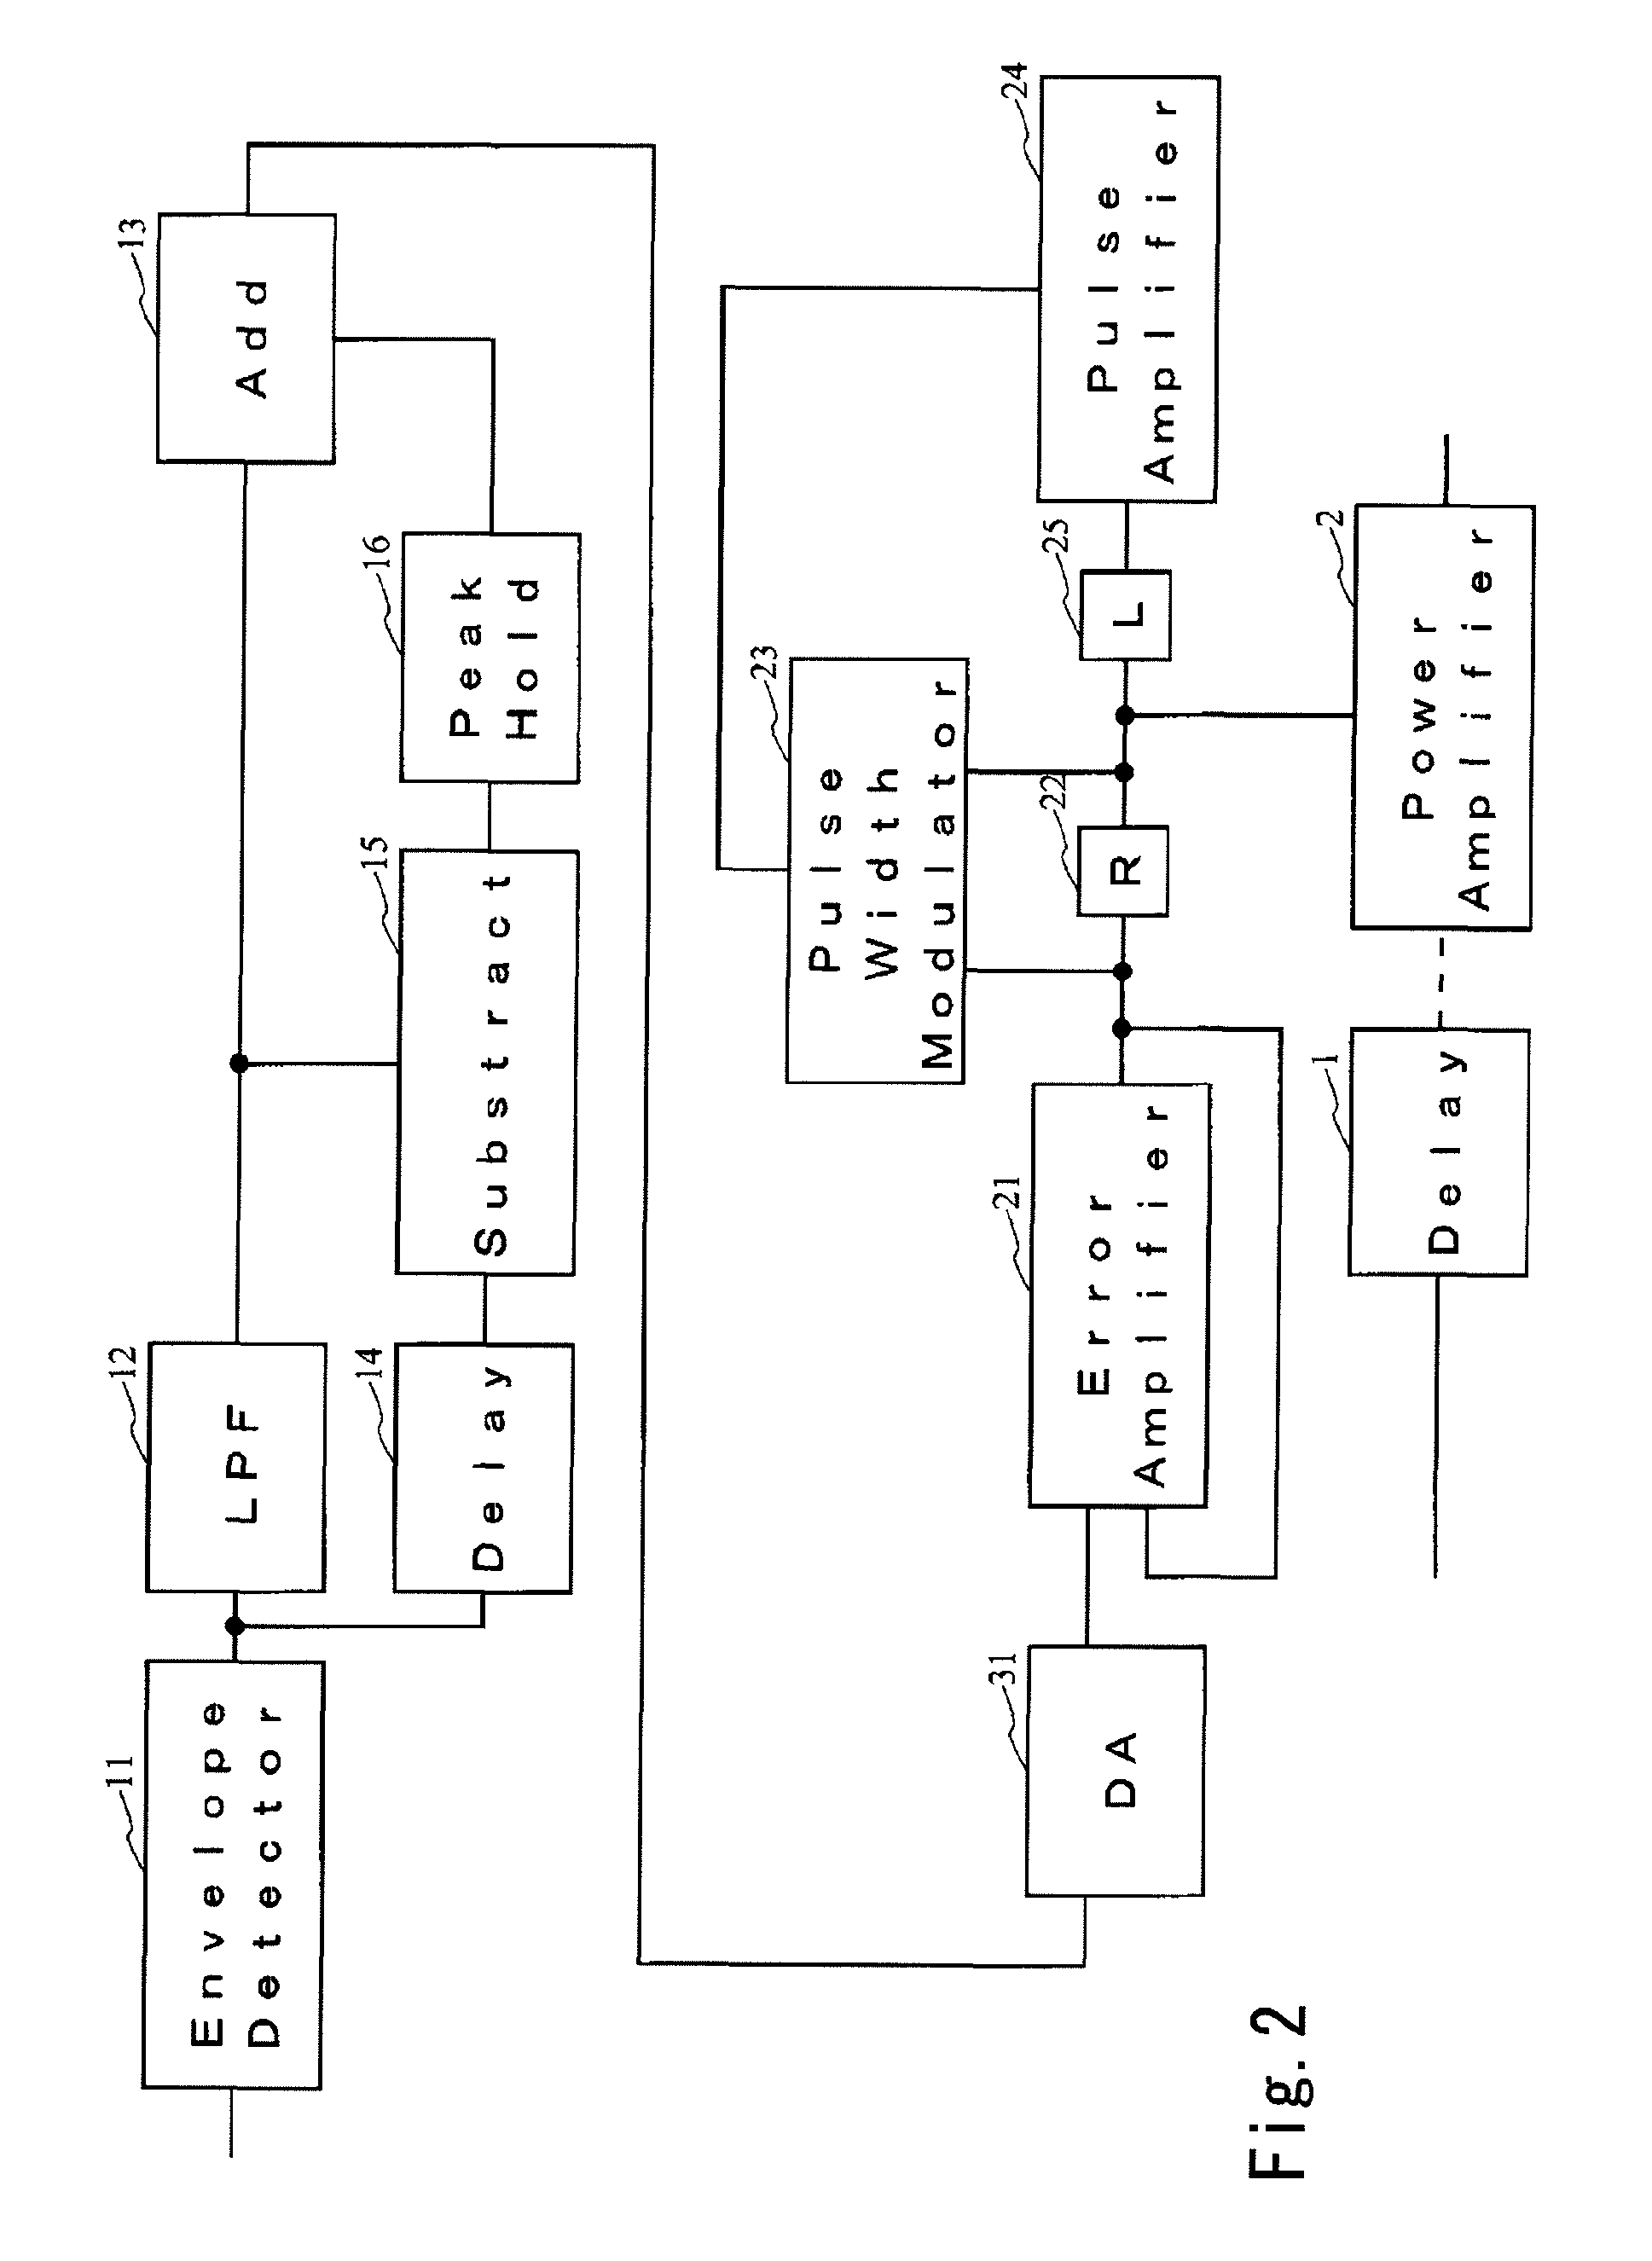 Supply voltage control device for amplifier